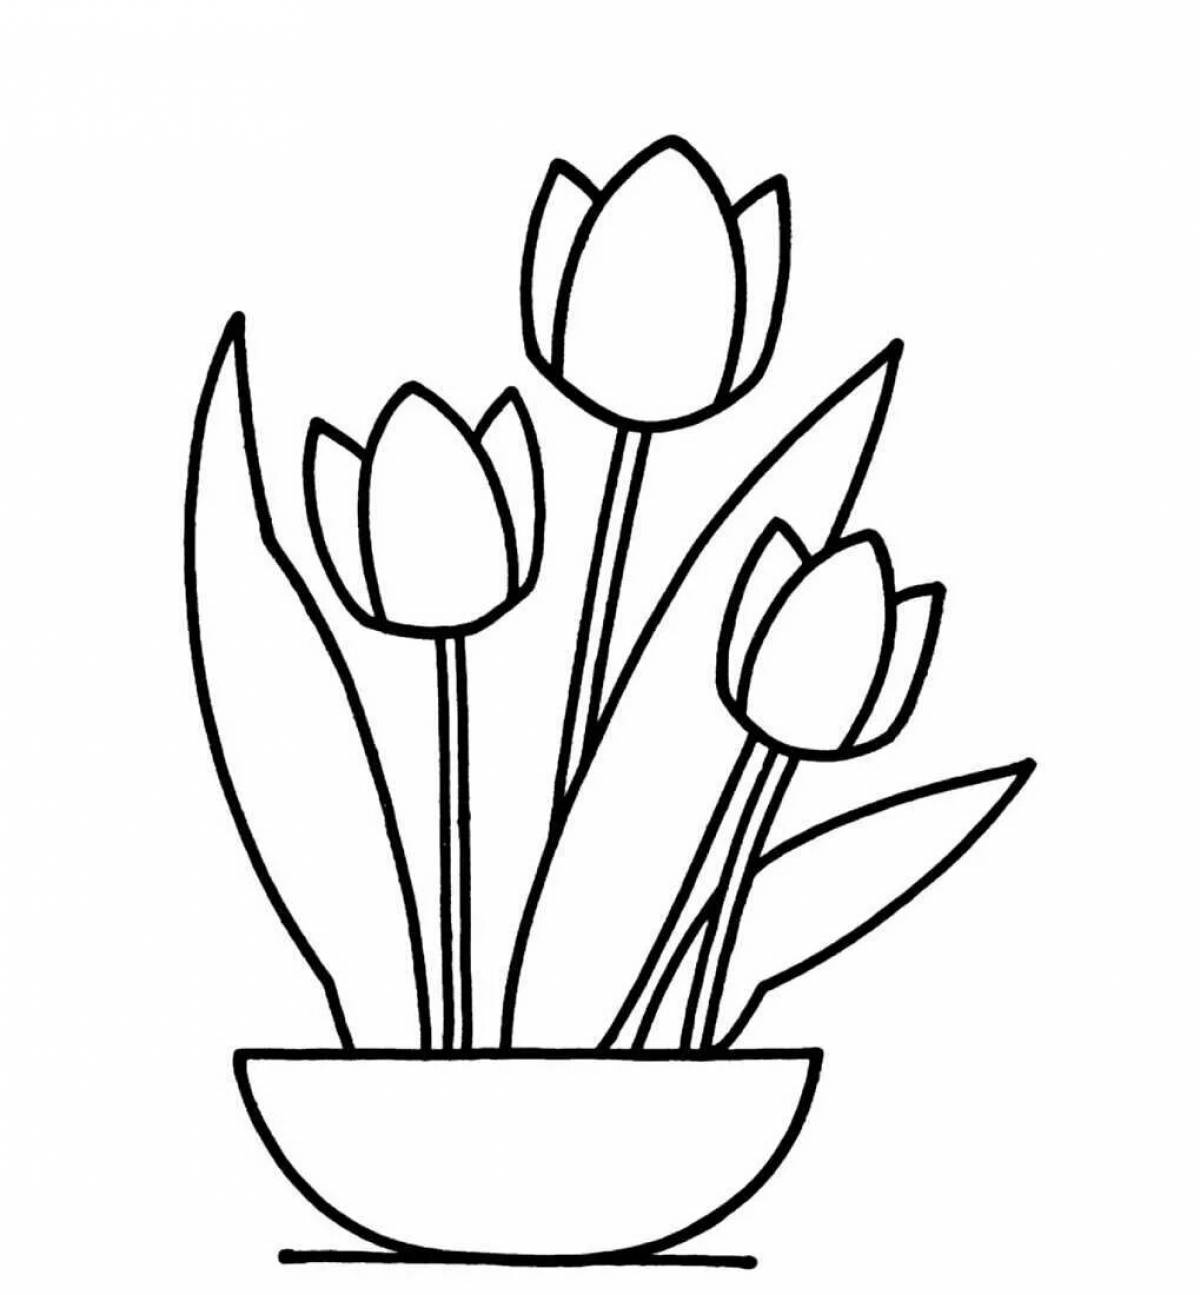 Cute tulips coloring book for 5-6 year olds